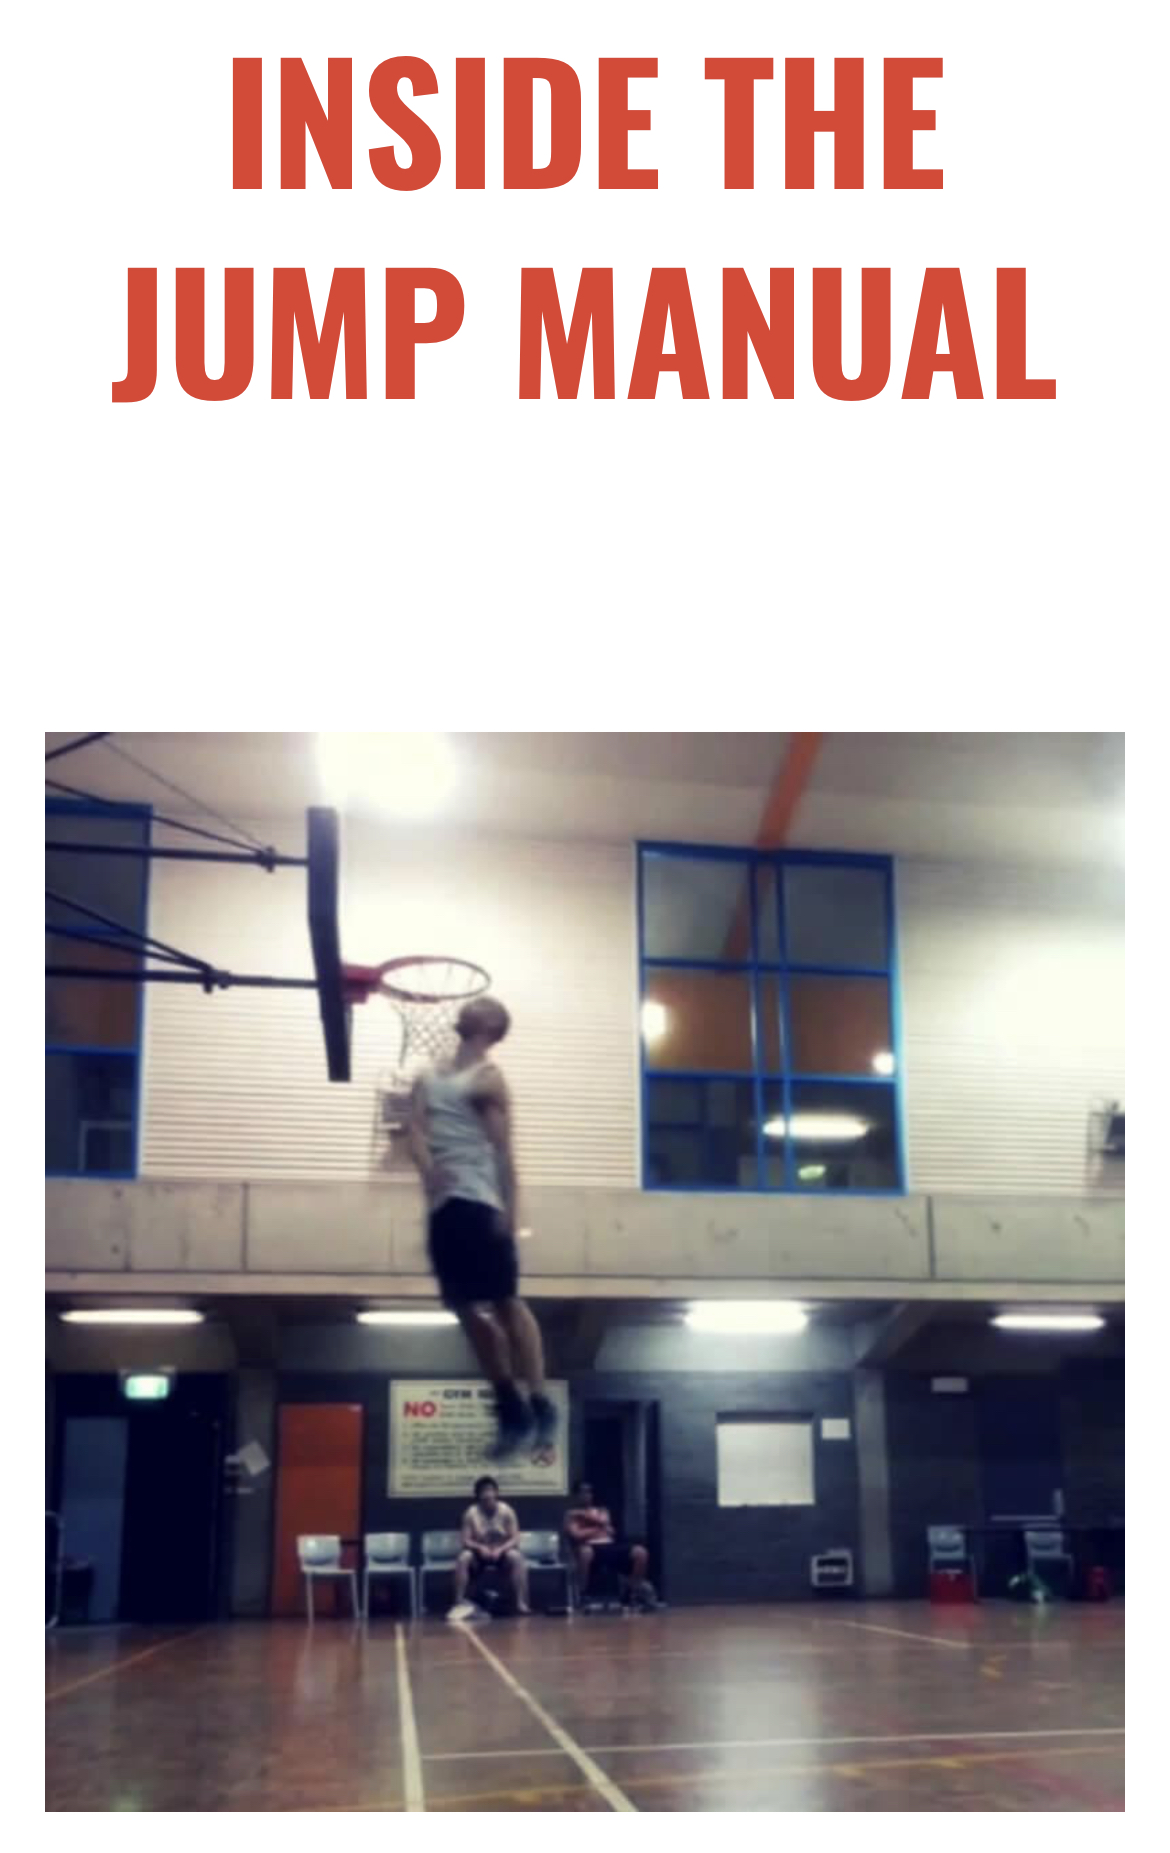 Is The Jump Manual Worth The Price